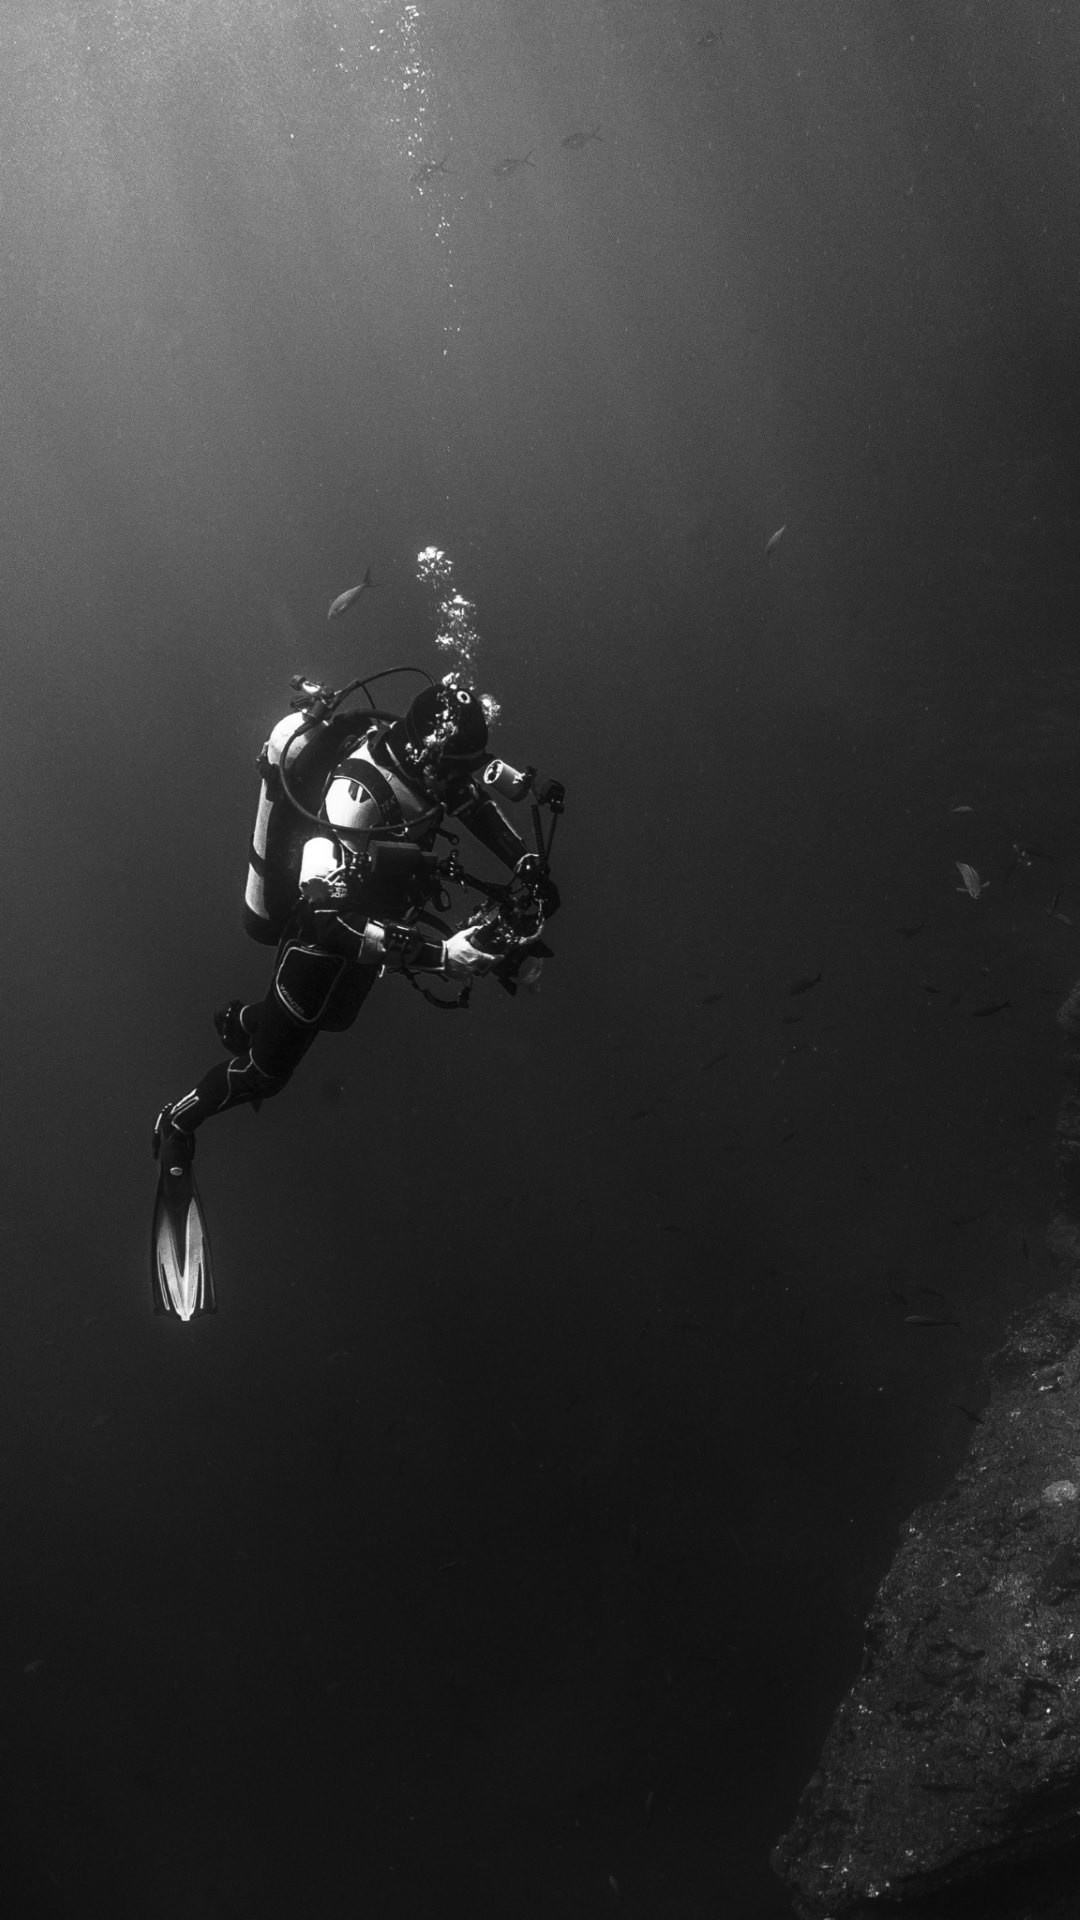 Scuba Diving: The monochrome diver performs a camera shooting of the water world. 1080x1920 Full HD Wallpaper.